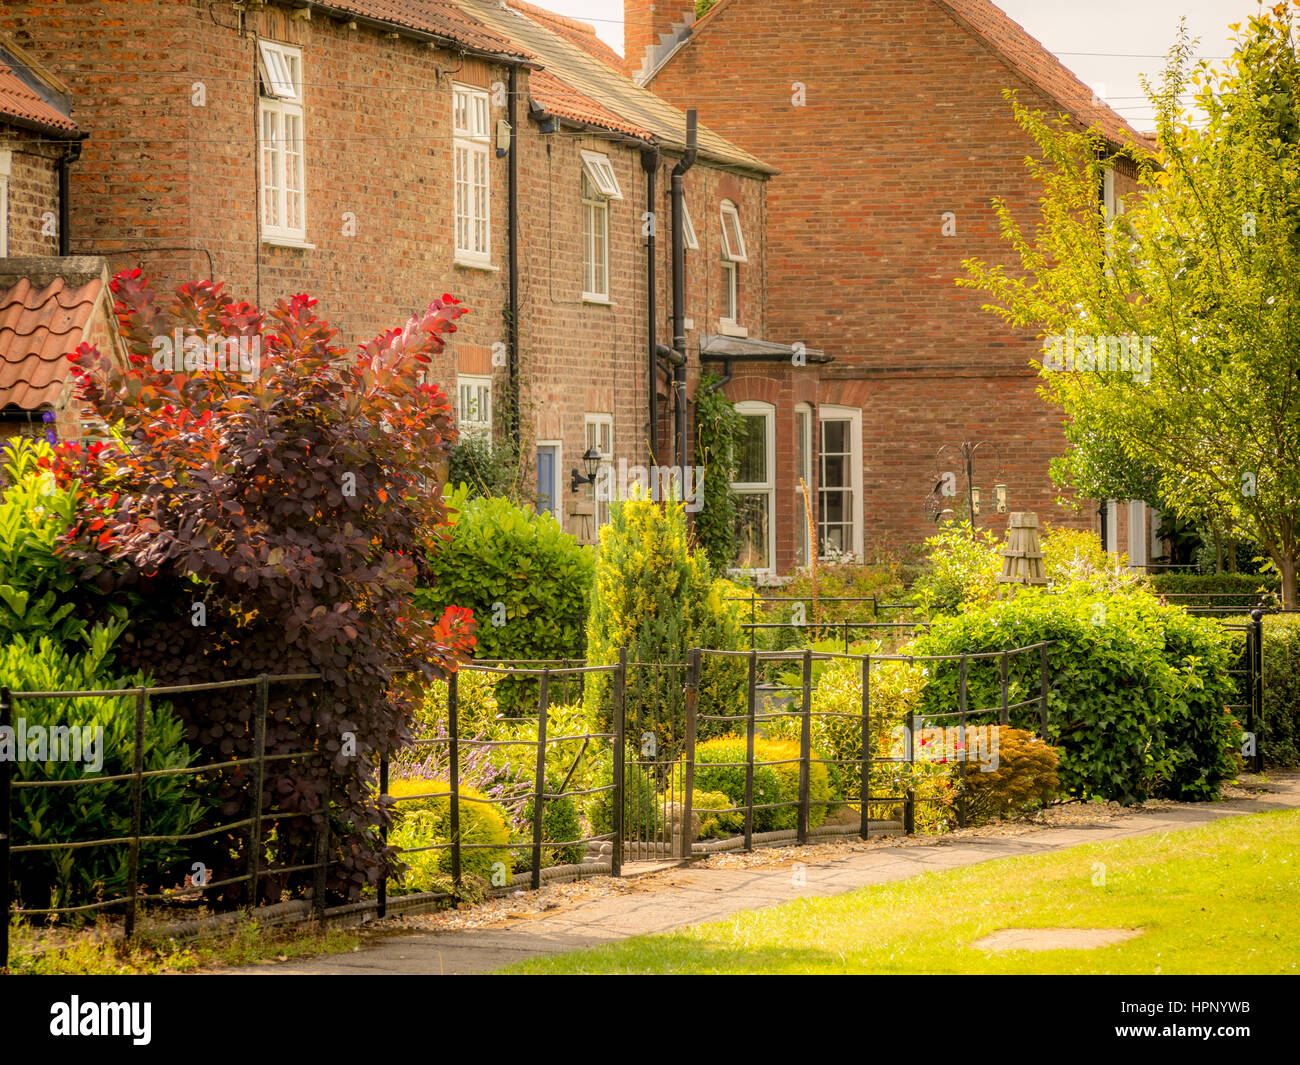 Traditional houses with front gardens, Haxby, Yorkshire, UK. Stock Photo